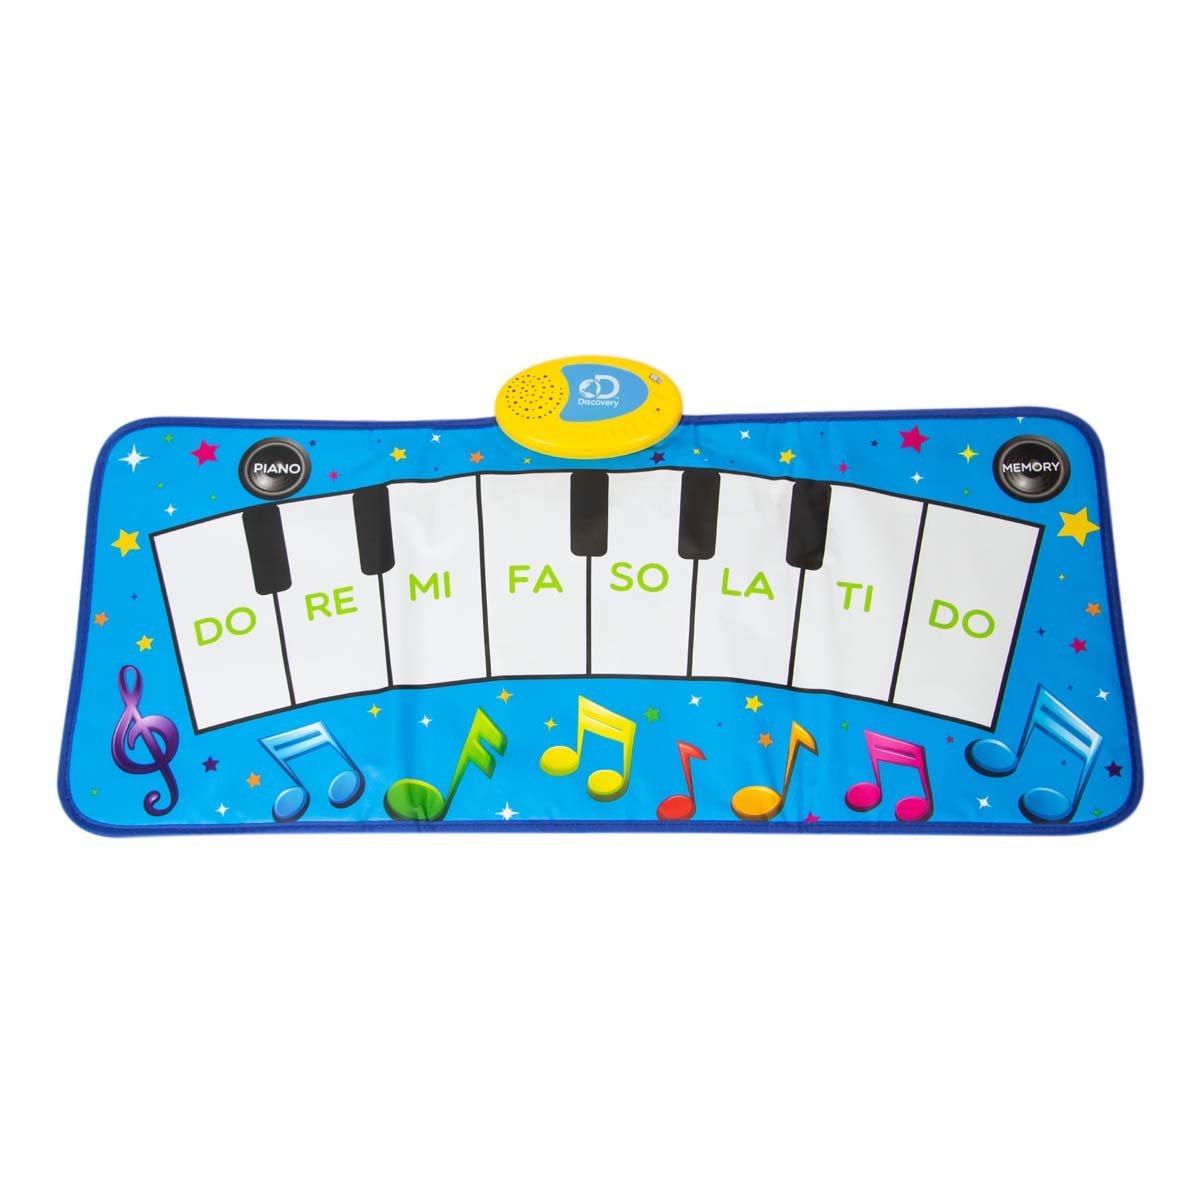 Tapete de Piano Musical Discovery Kids